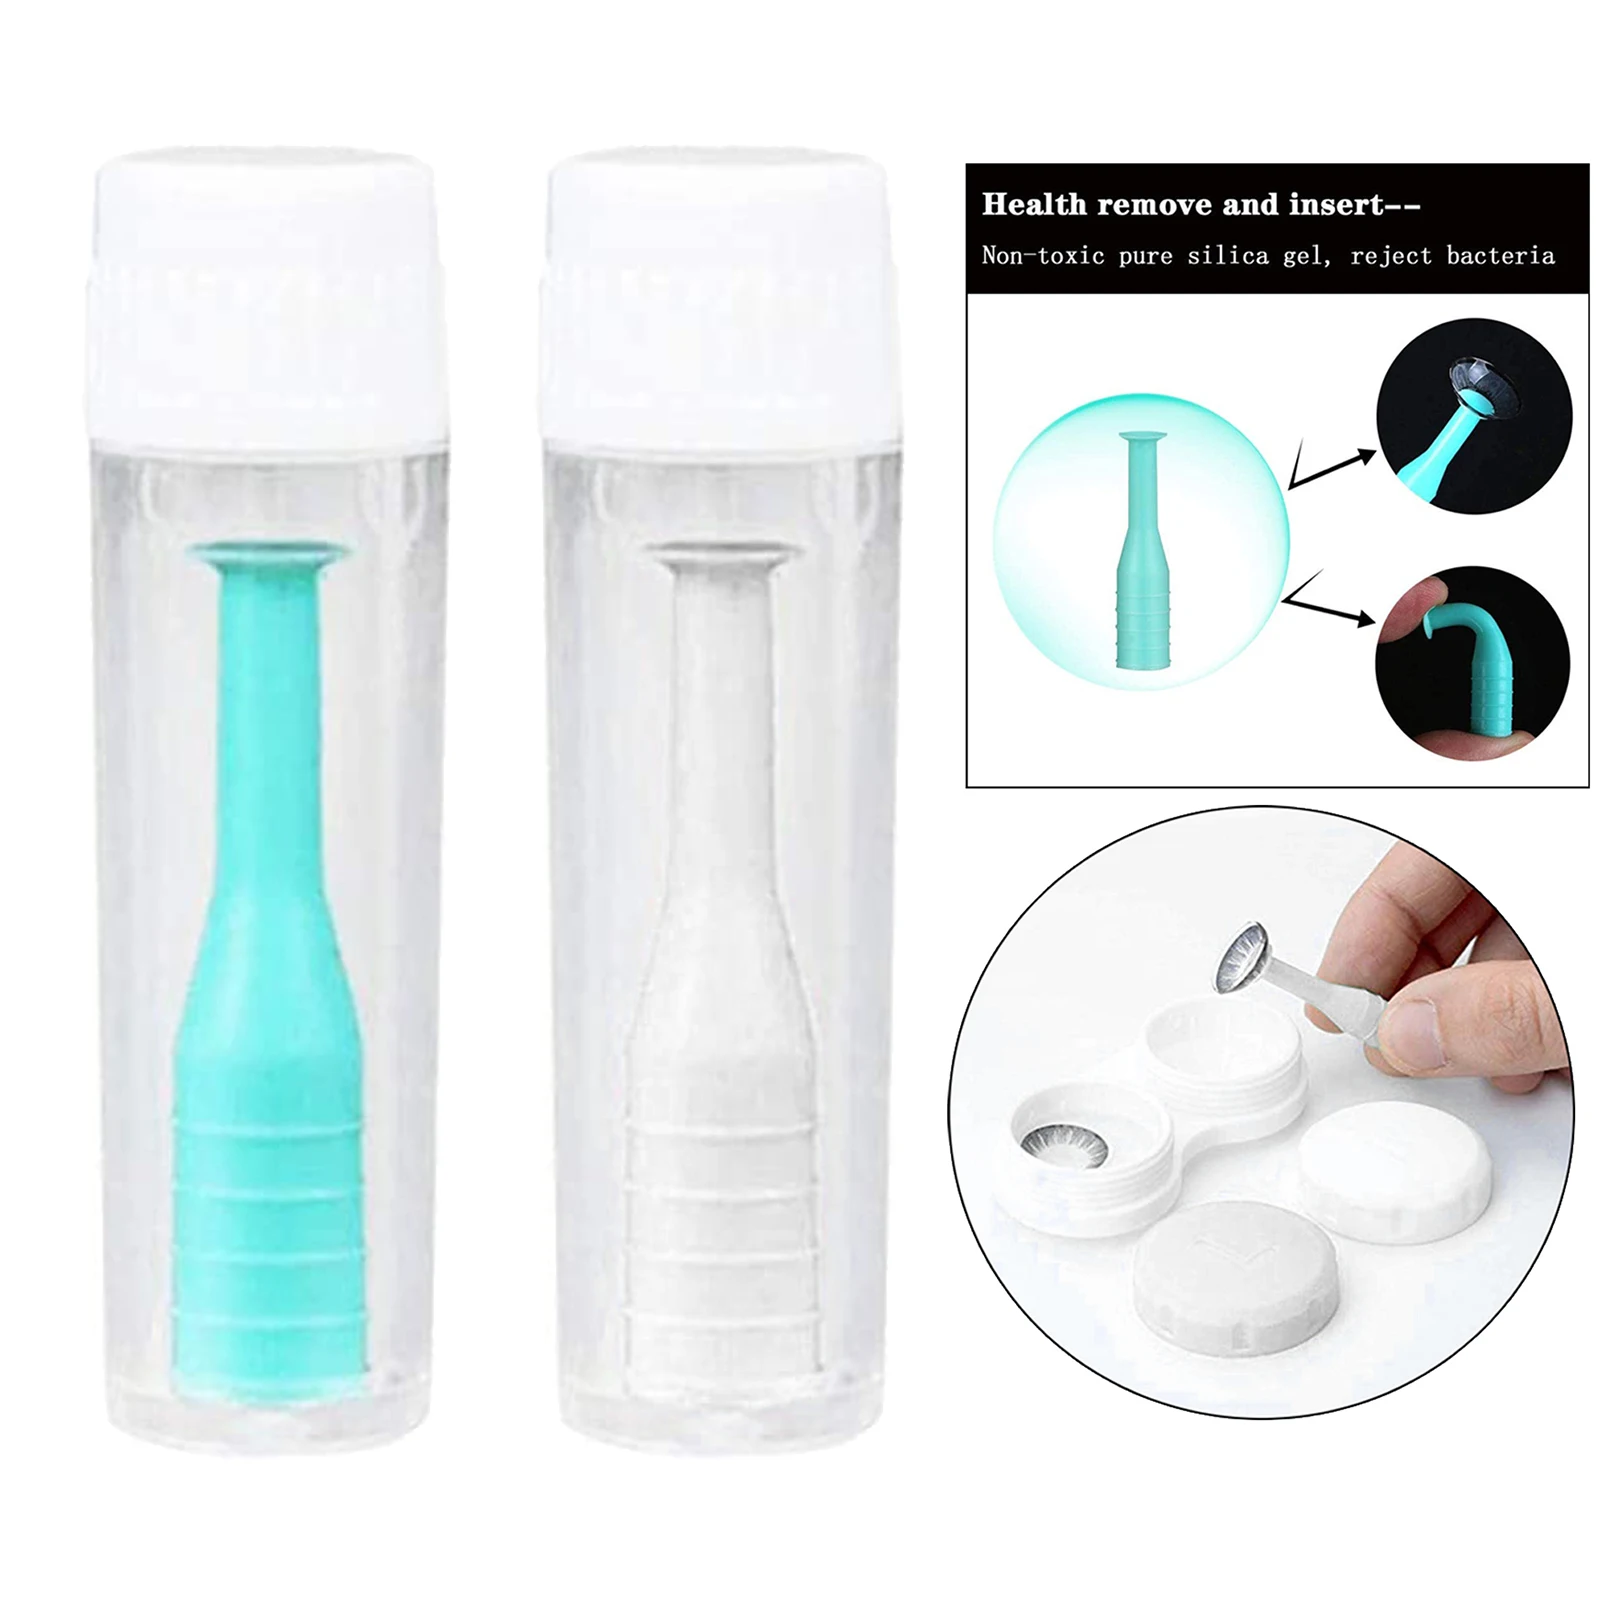 Soft Contact Lens Remover Inserter Plunger Extractor Applicator for Soft Hard Lenses